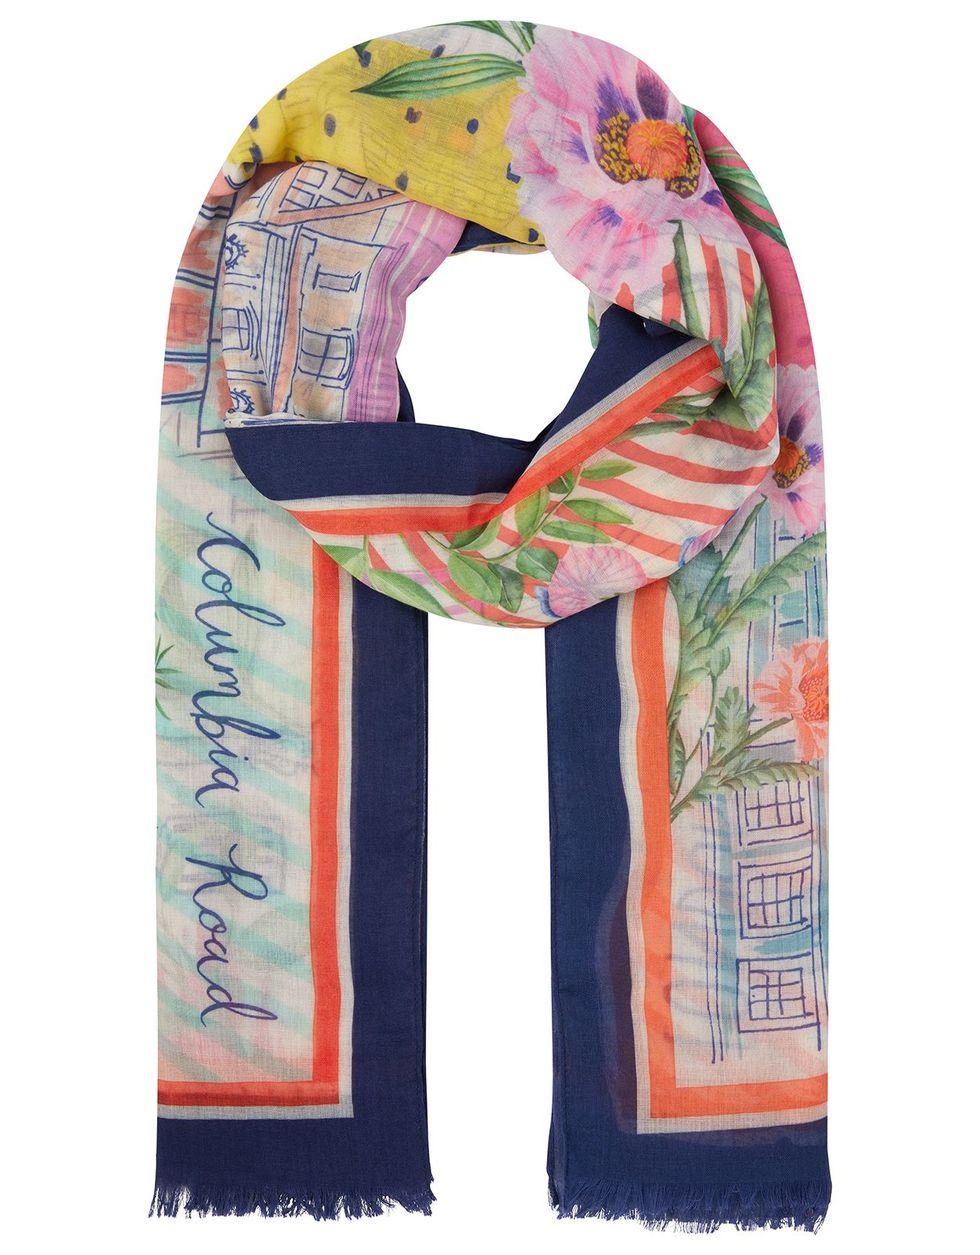 London City Print Recycled Scarf, £22.50